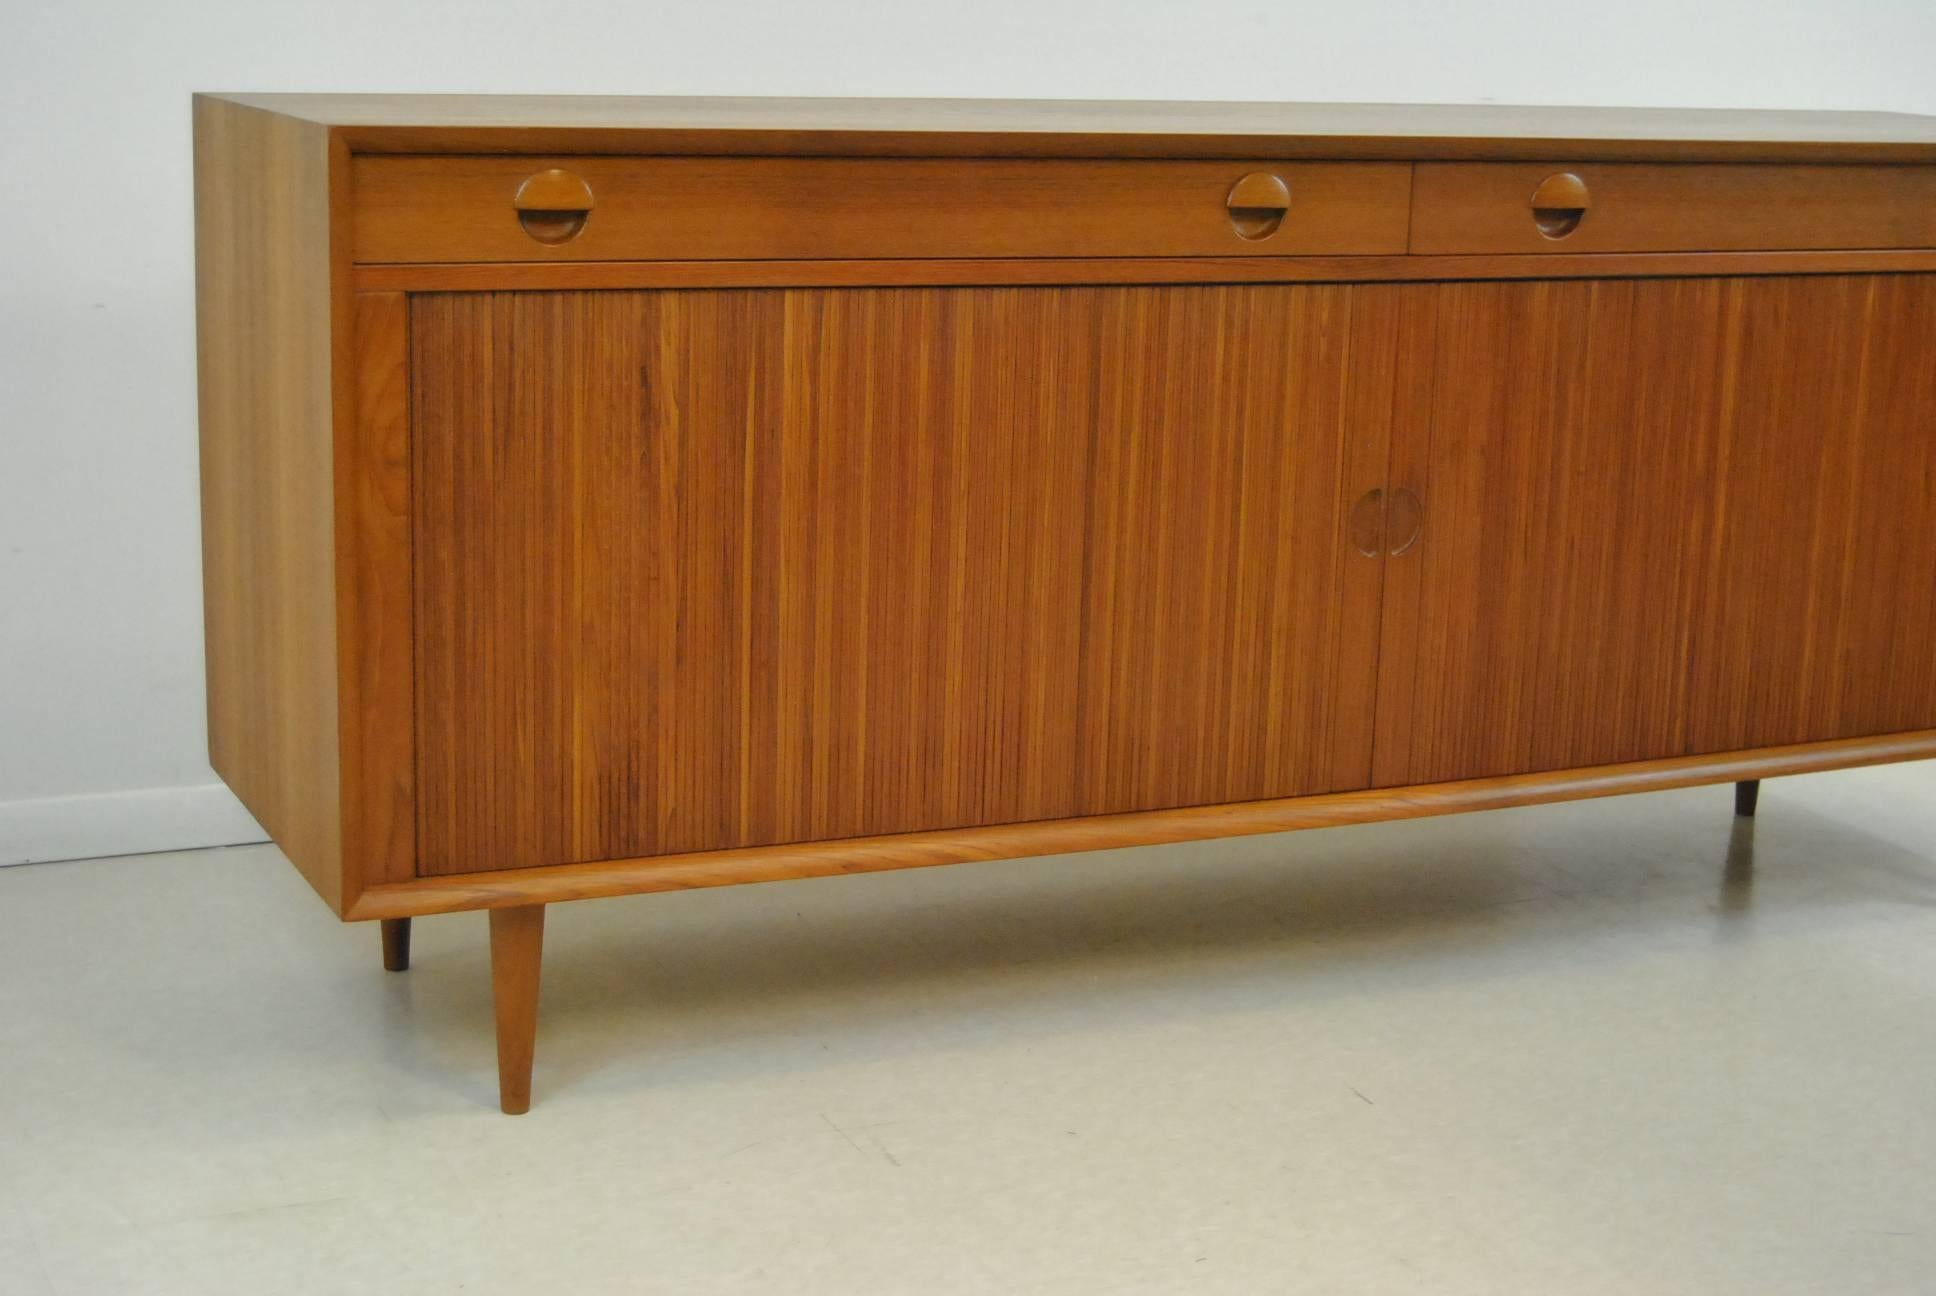 A great 71.5" long Danish Modern teak credenza designed by Grete Jalk for Sibast. The credenza features two tambour doors and two drawers. The two tambour doors open to storage areas with one adjustable shelf. The drawers feature "cat's